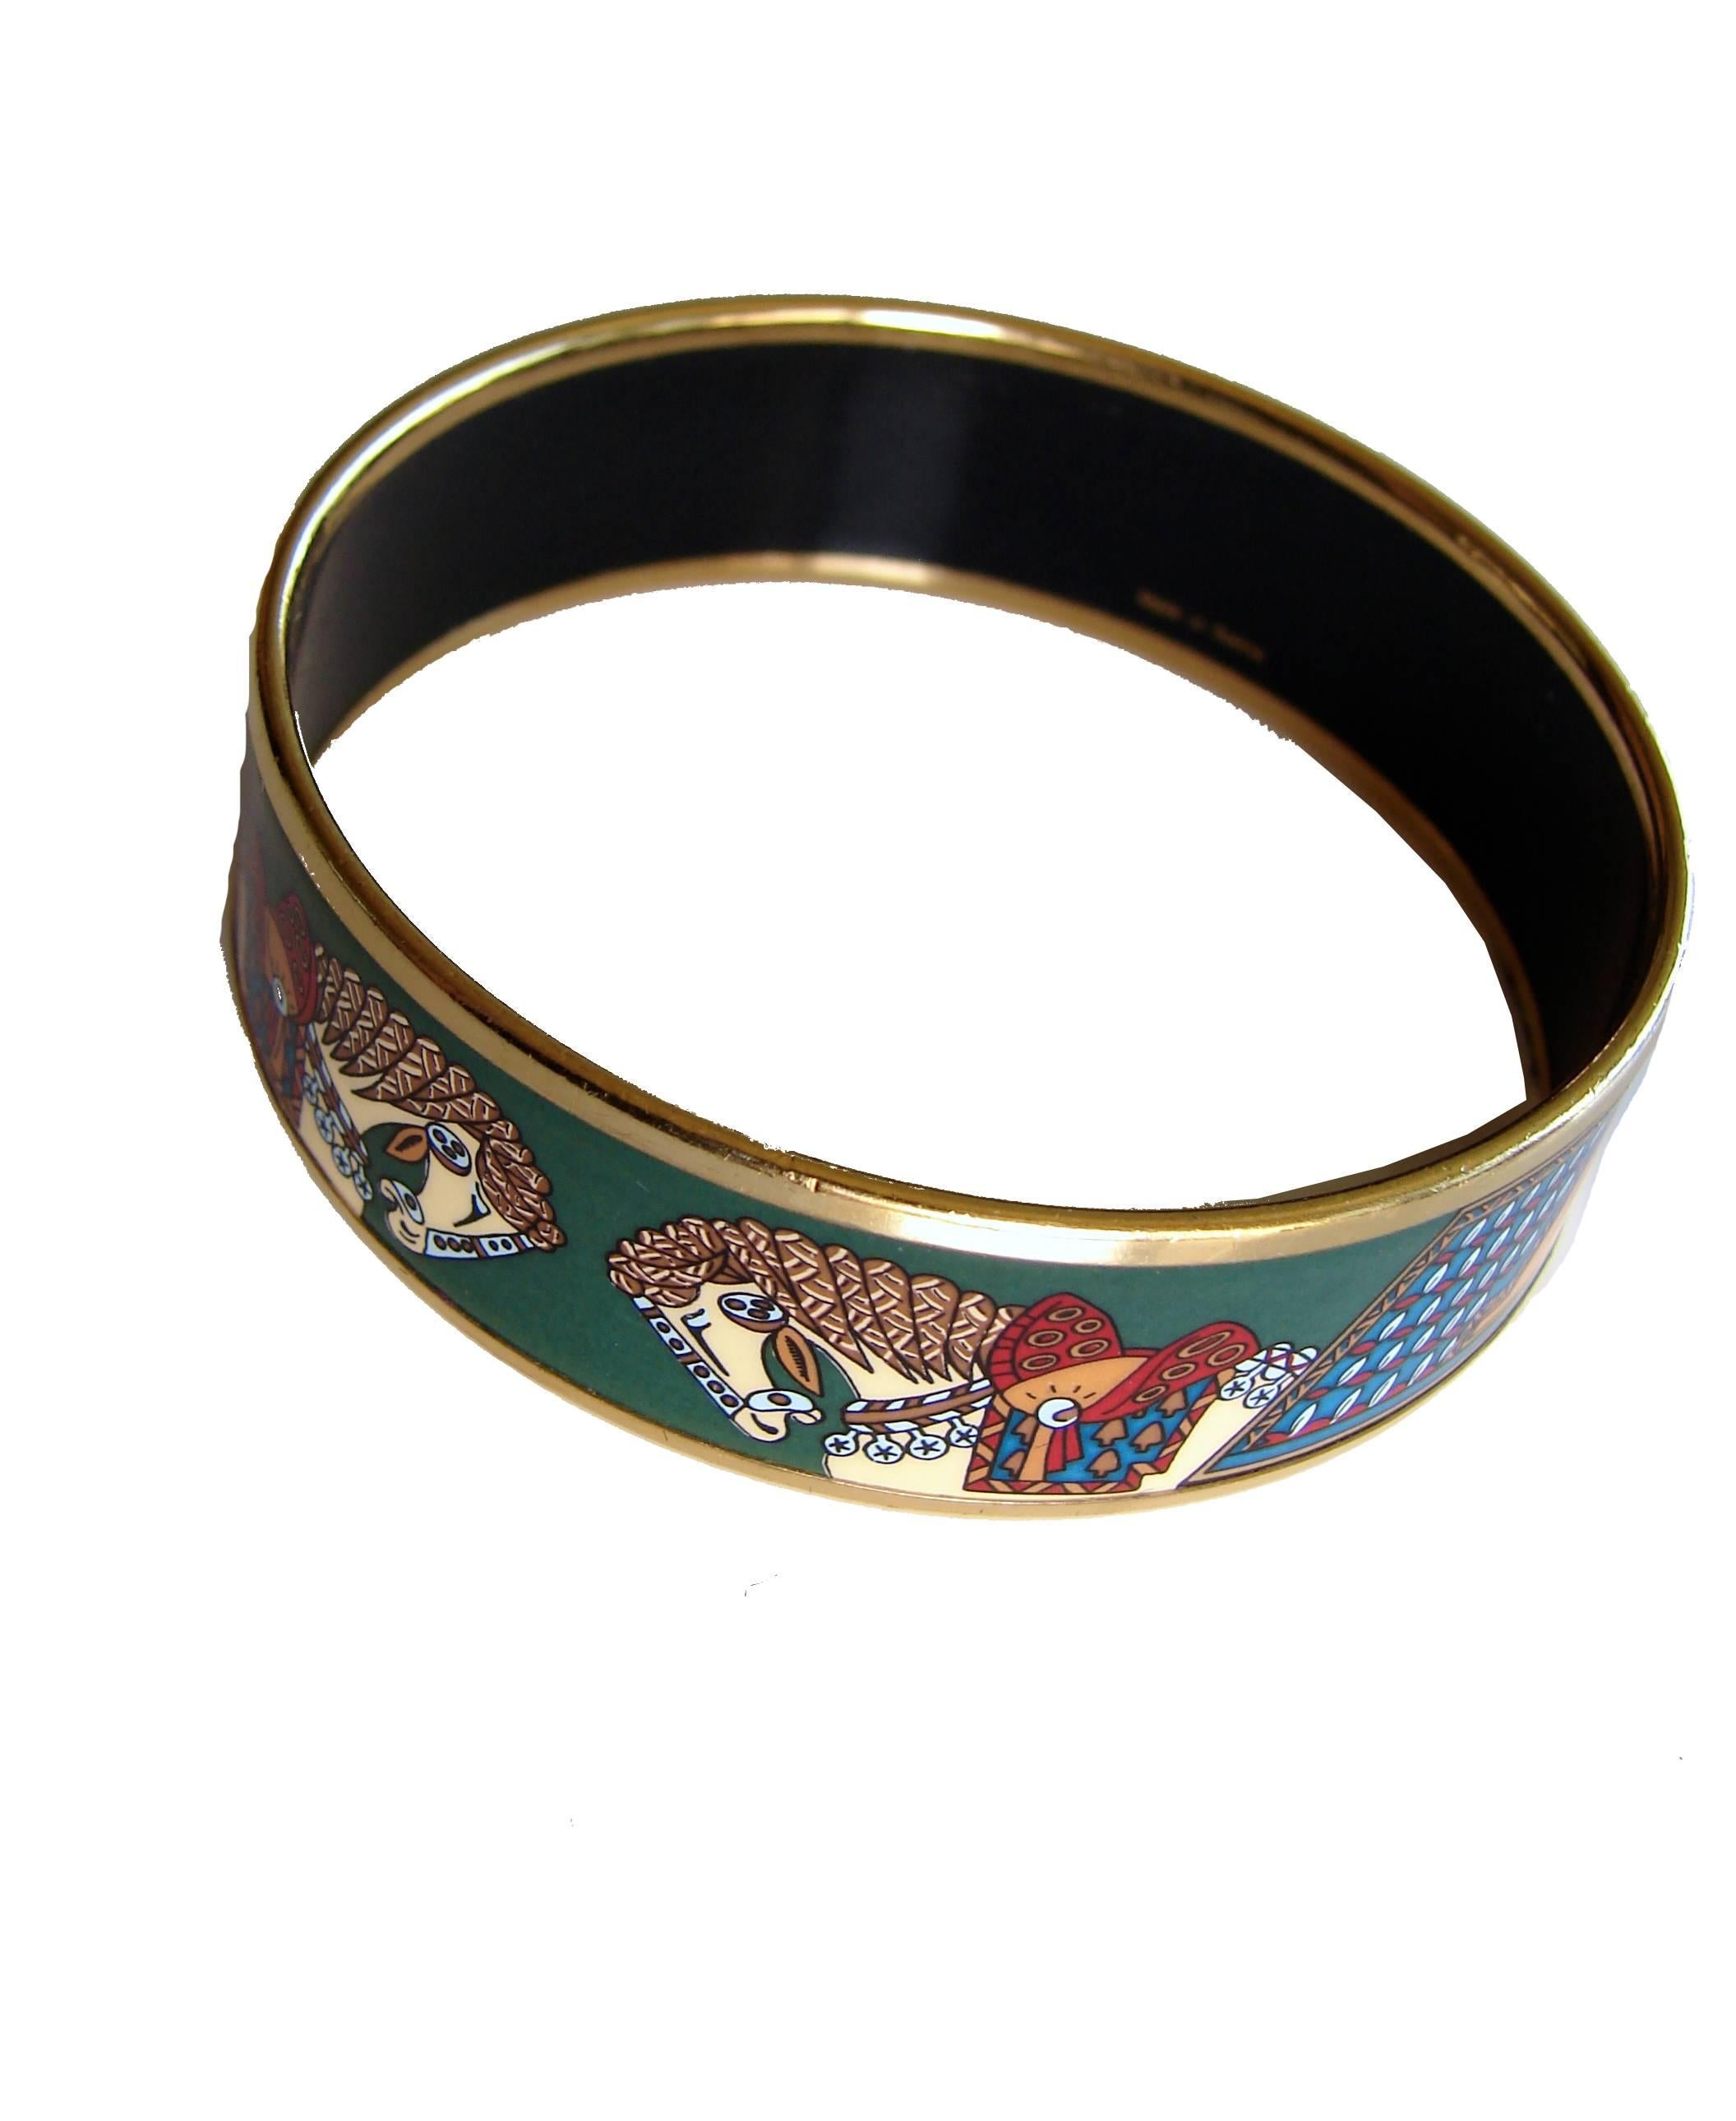 Vintage bracelet designed by Hermes in the 1990s.  Features an equestrian theme in shades of green, orange and white with gold edges.  In good condition for its age, we note several dings to the enamel from wear and scratching to the gold edges. 